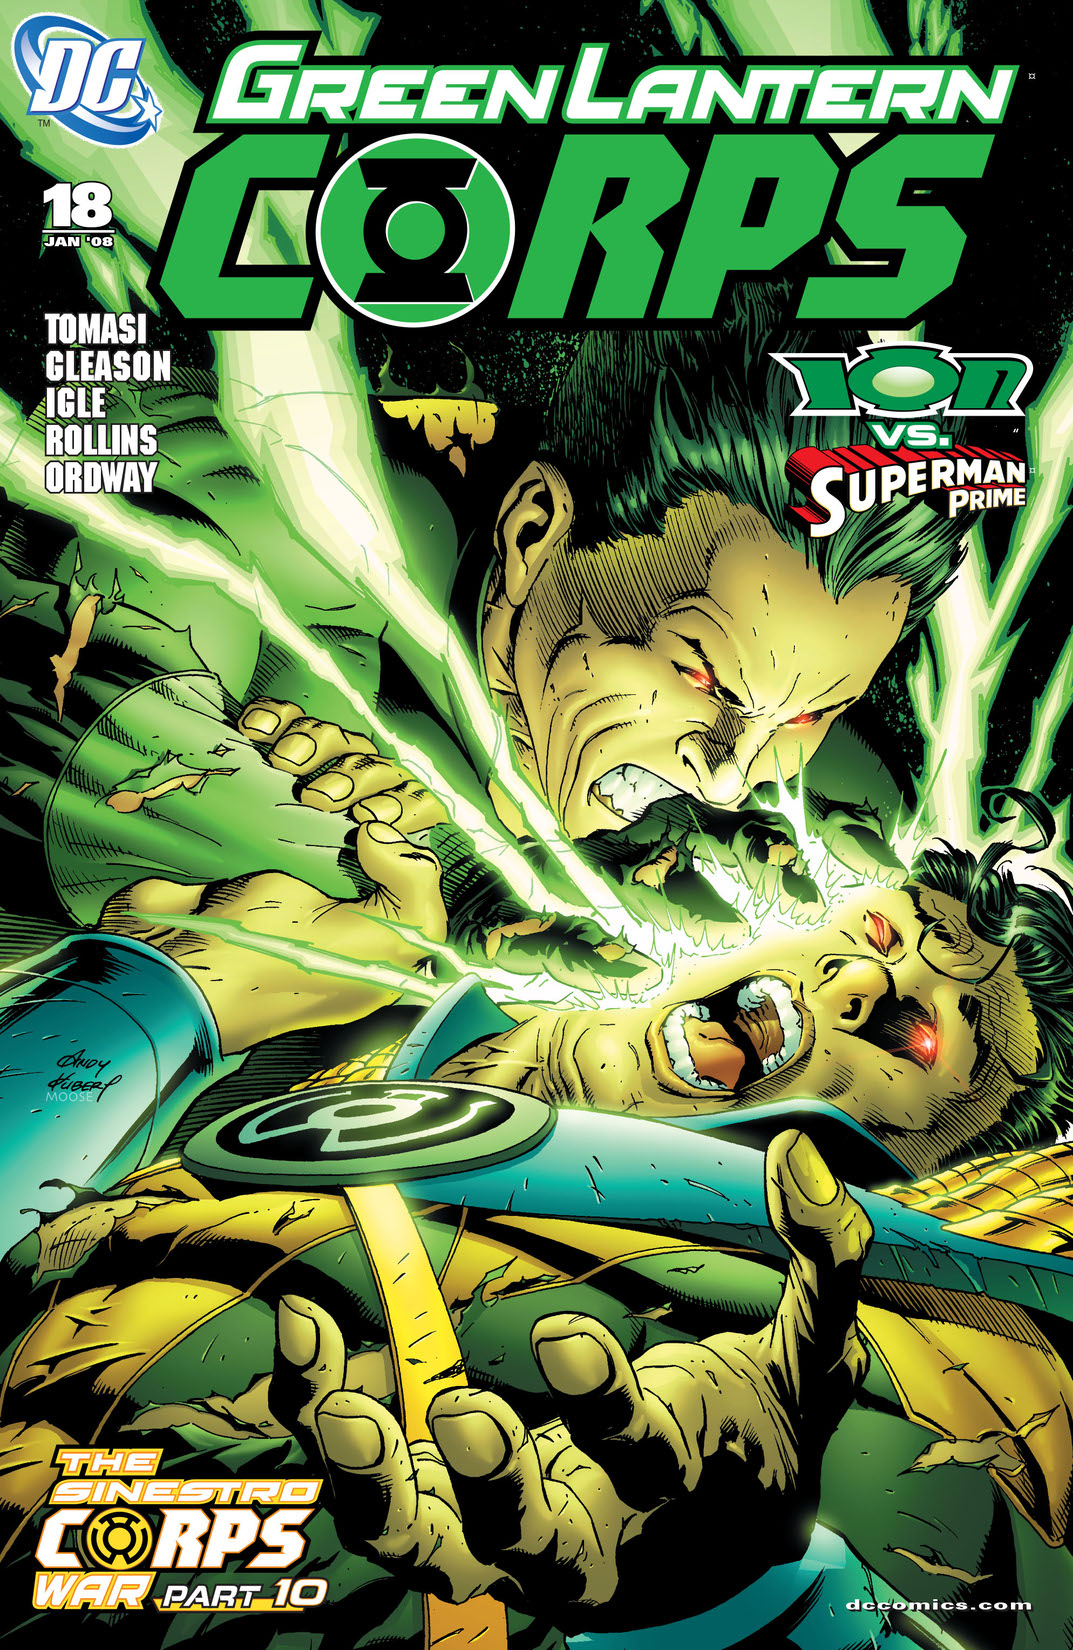 Green Lantern Corps (2006-) #18 preview images